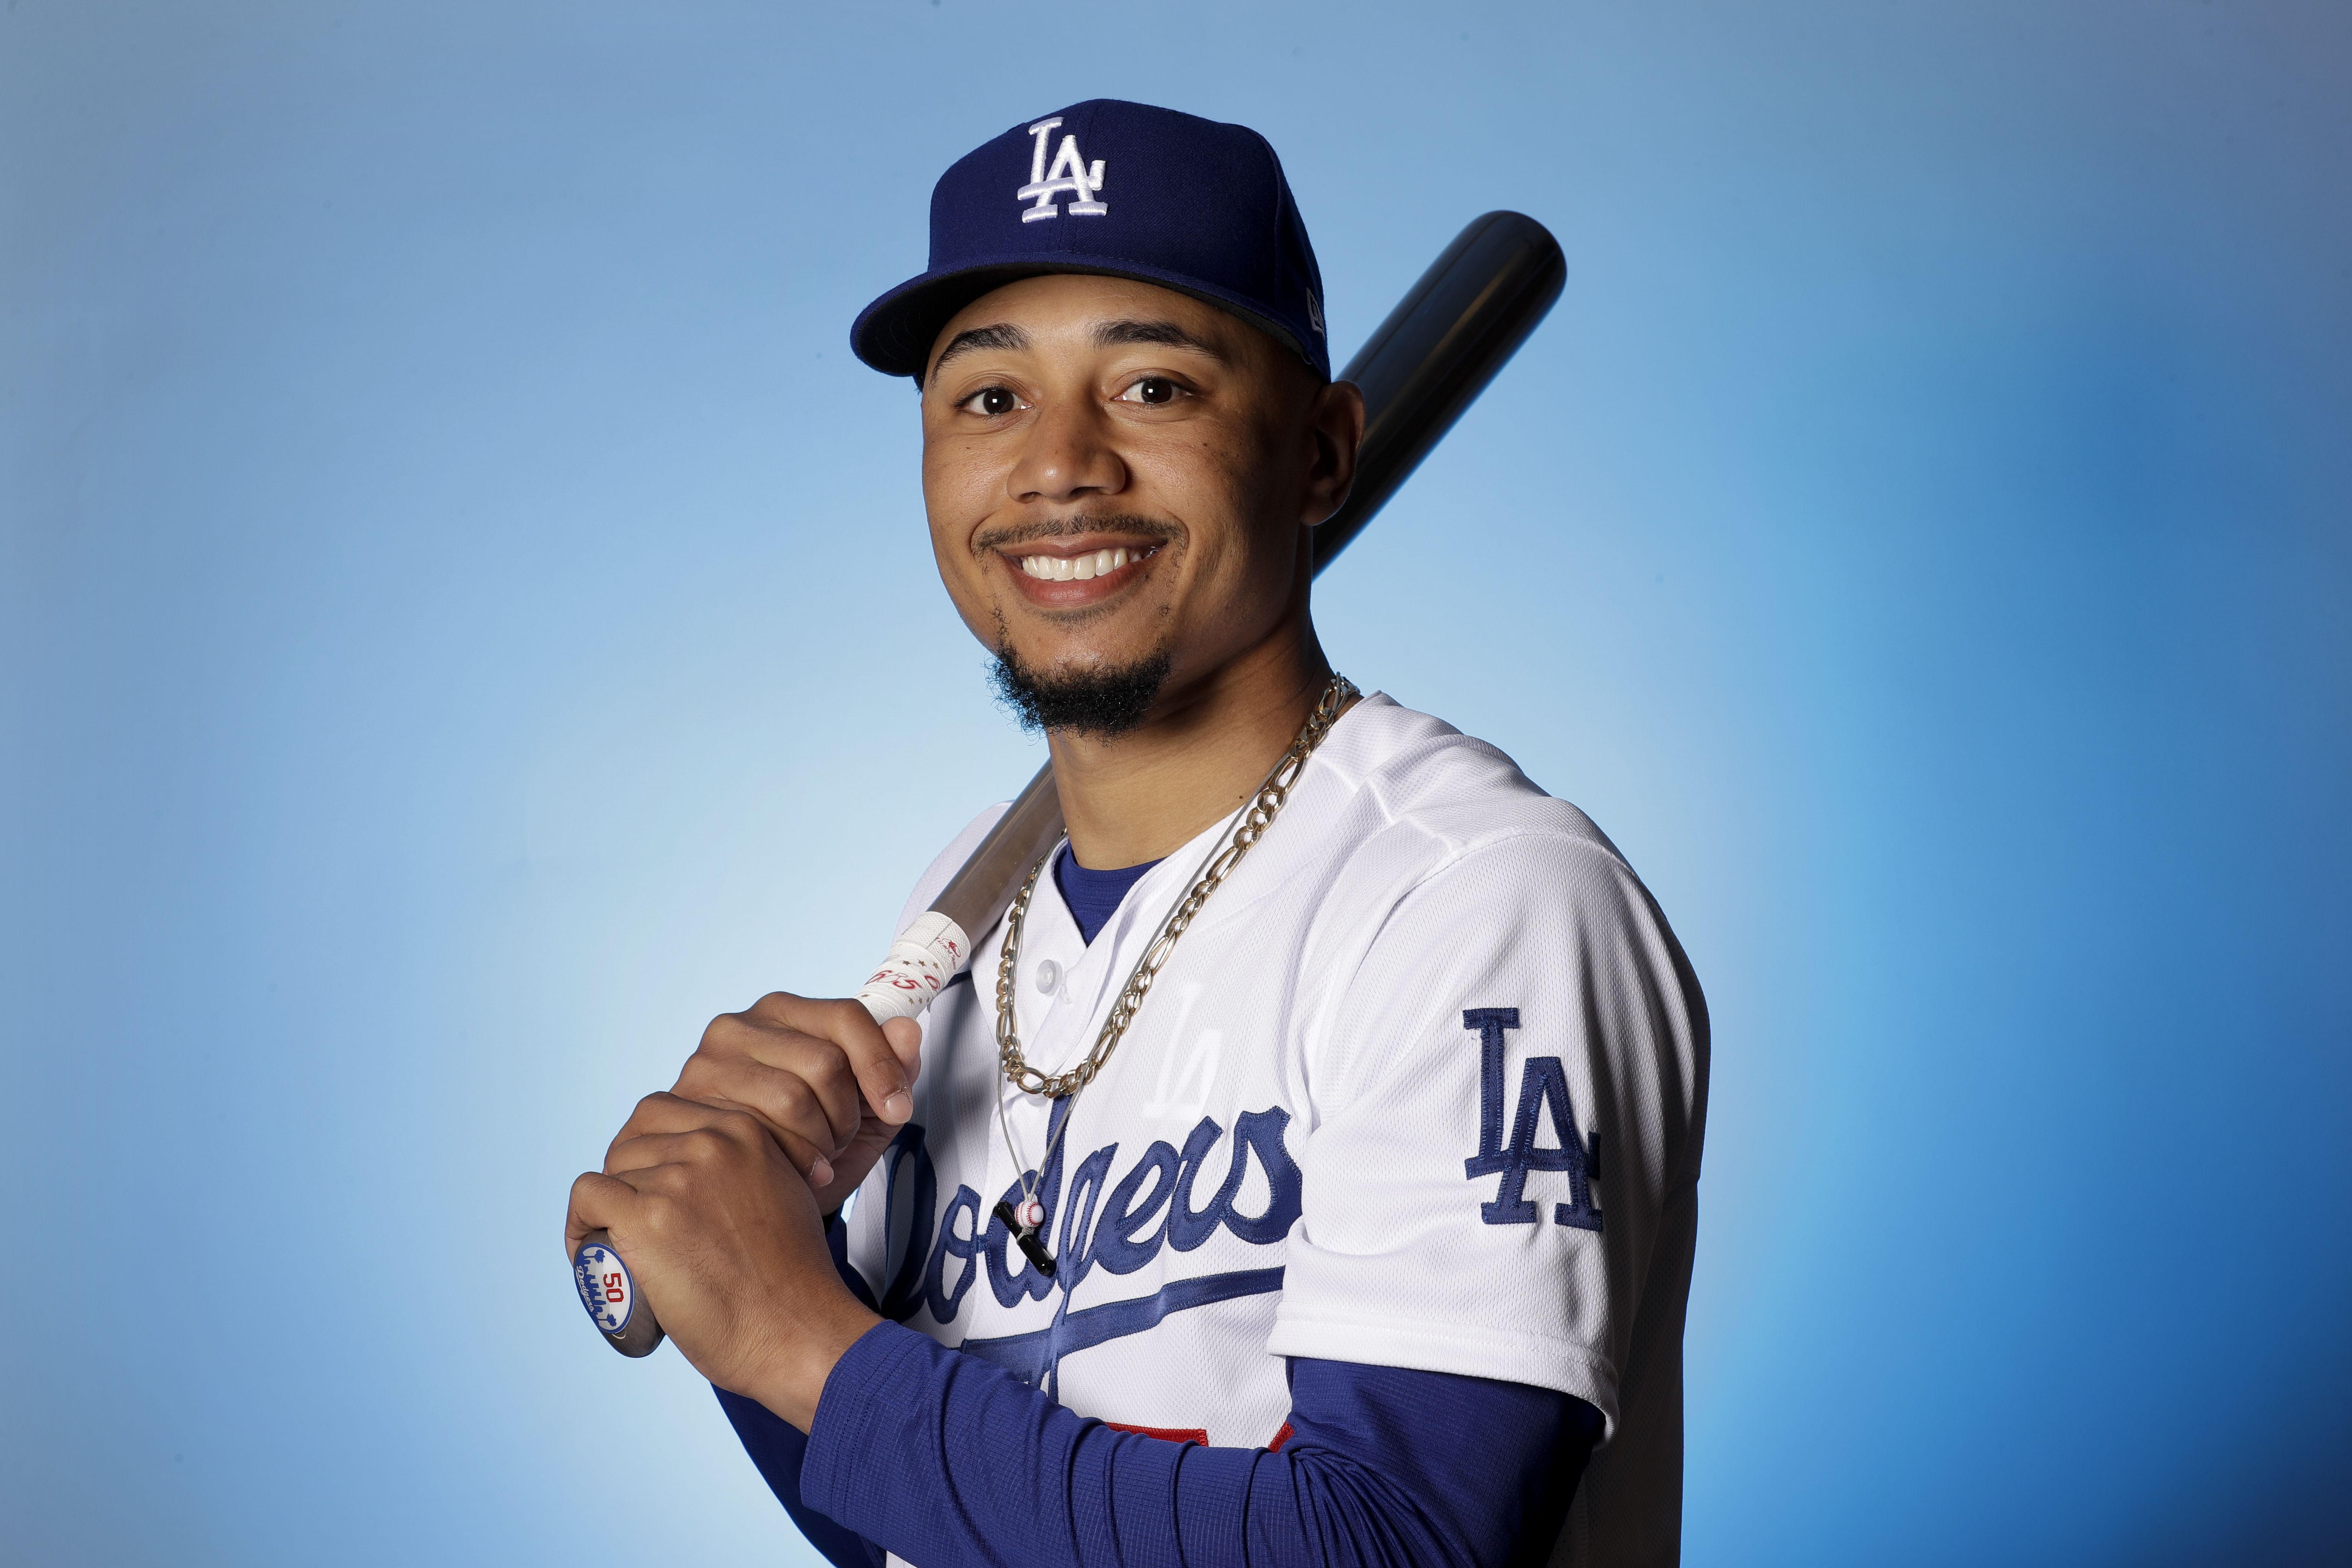  Mookie Betts Los Angeles Dodgers MLB Boys Youth 8-20